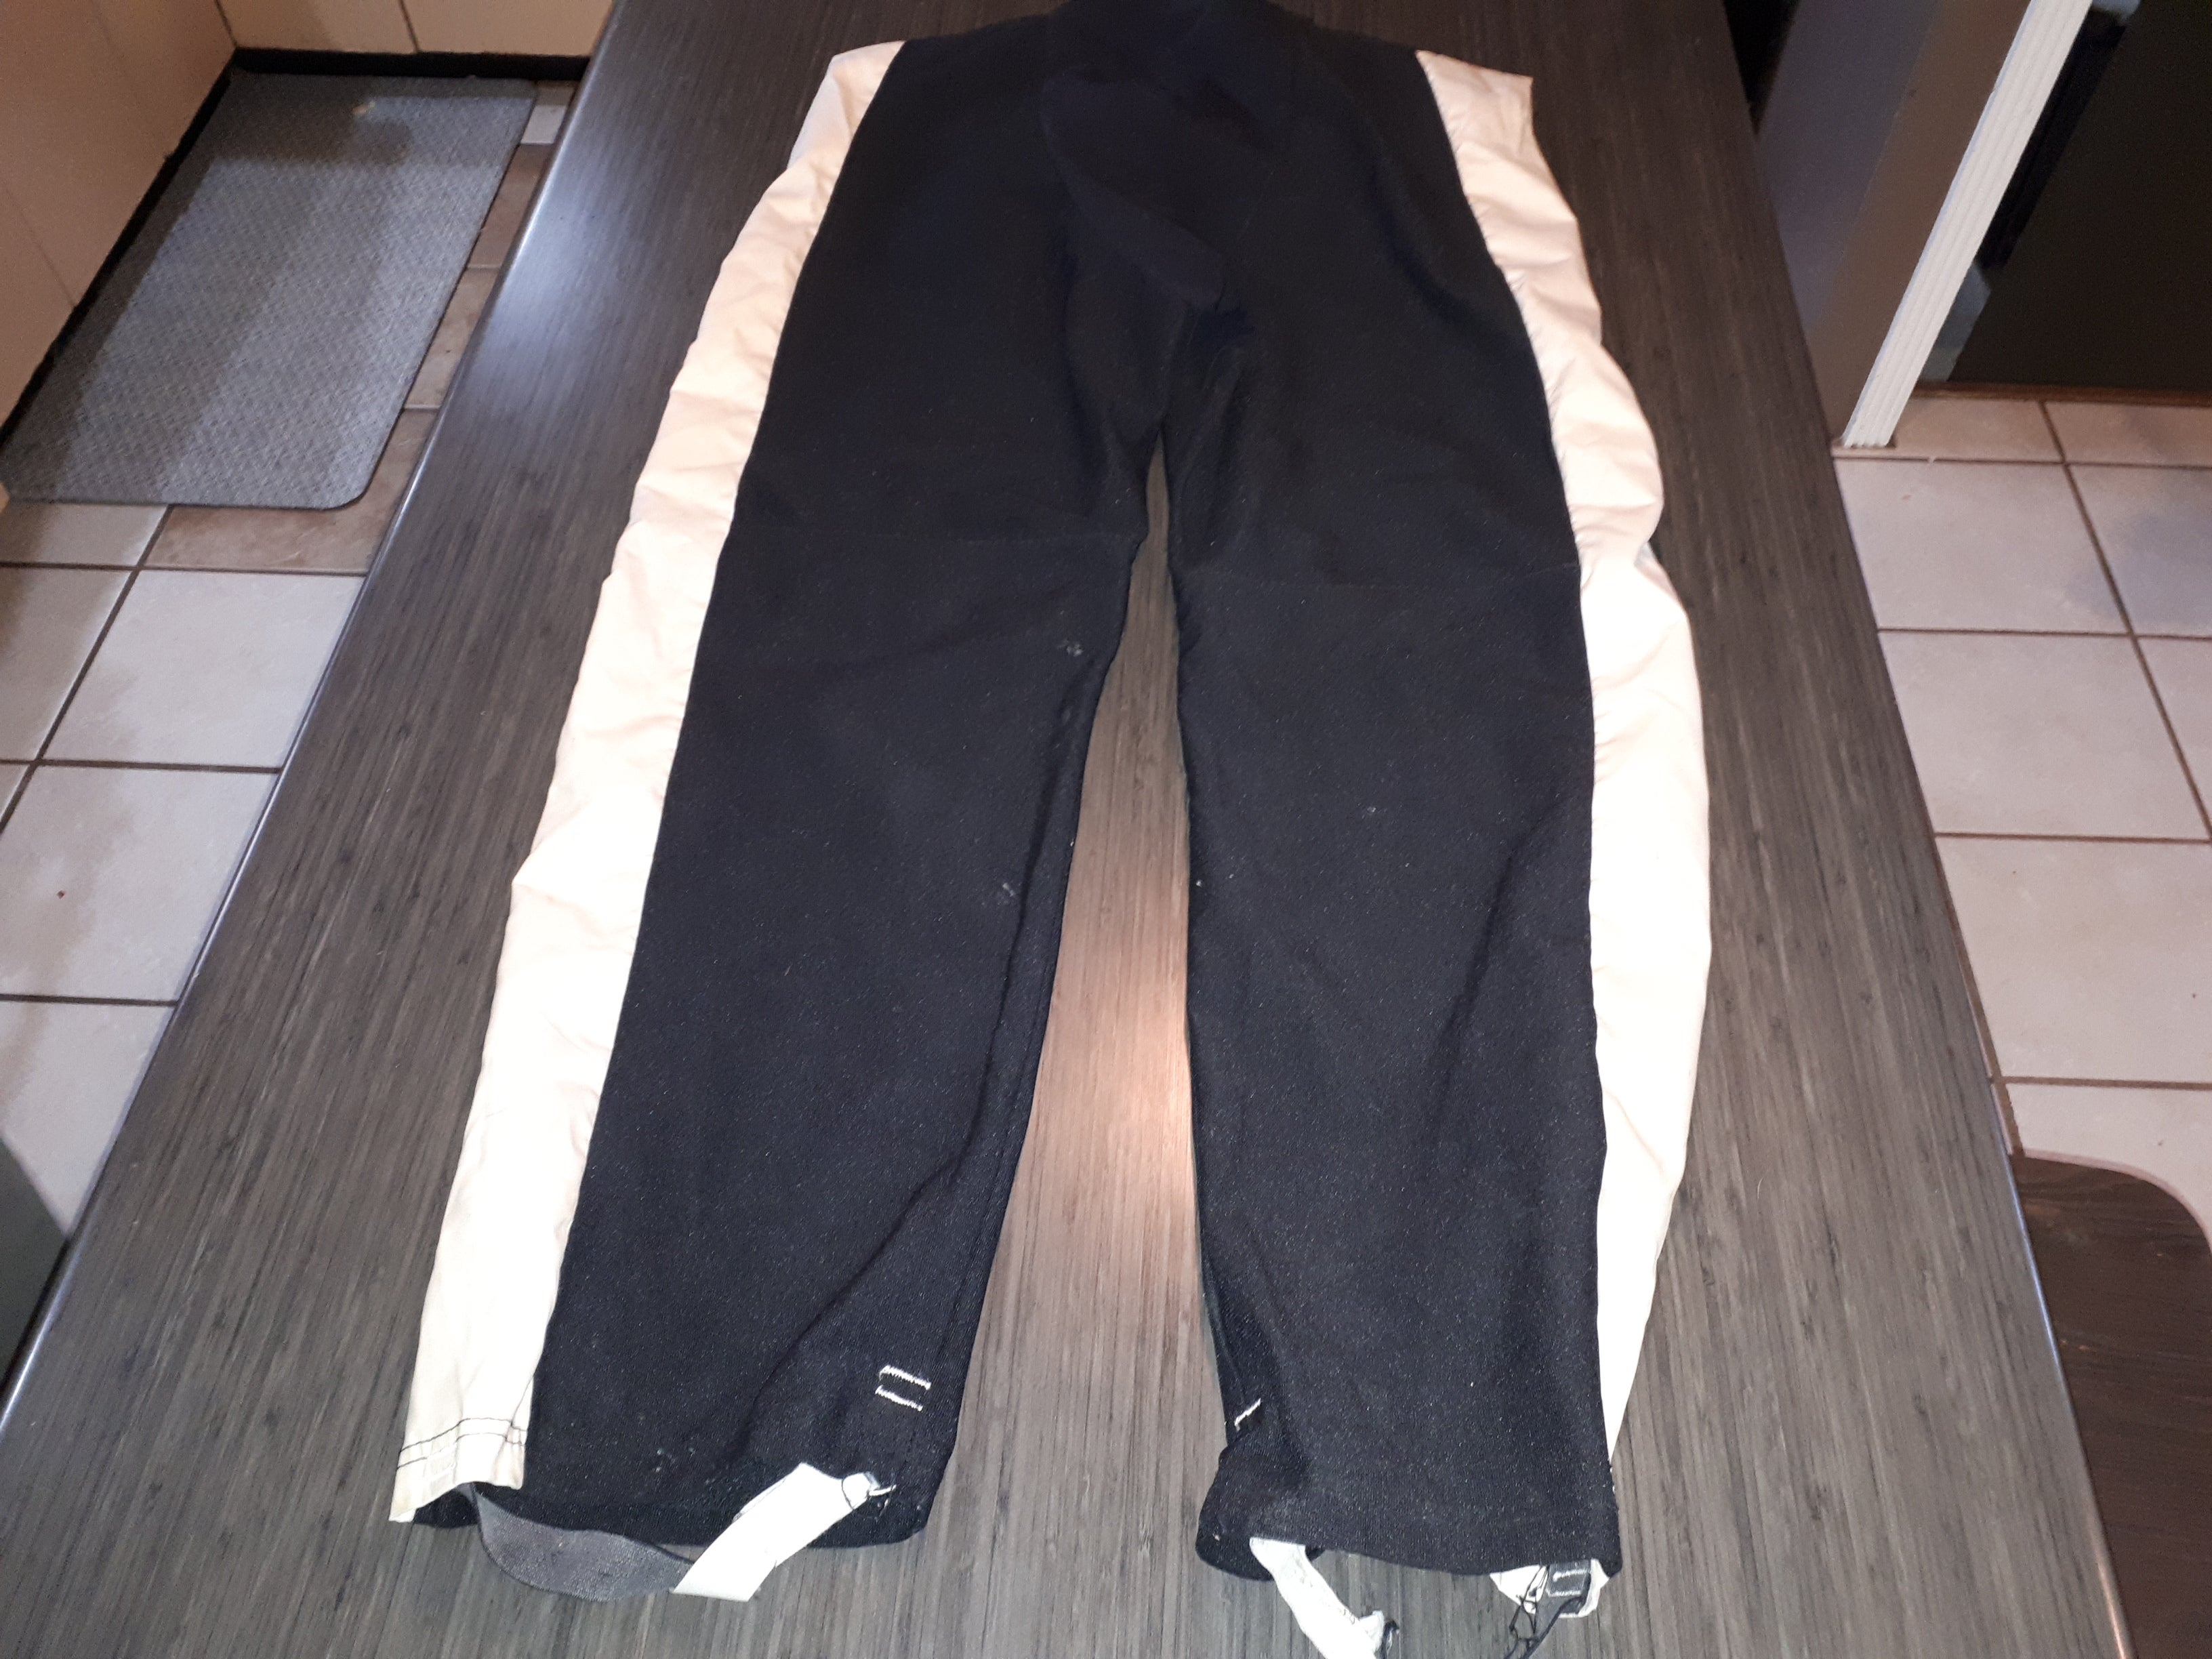 Vtg Cooper Cooperall Cooperalls ice hockey pants large